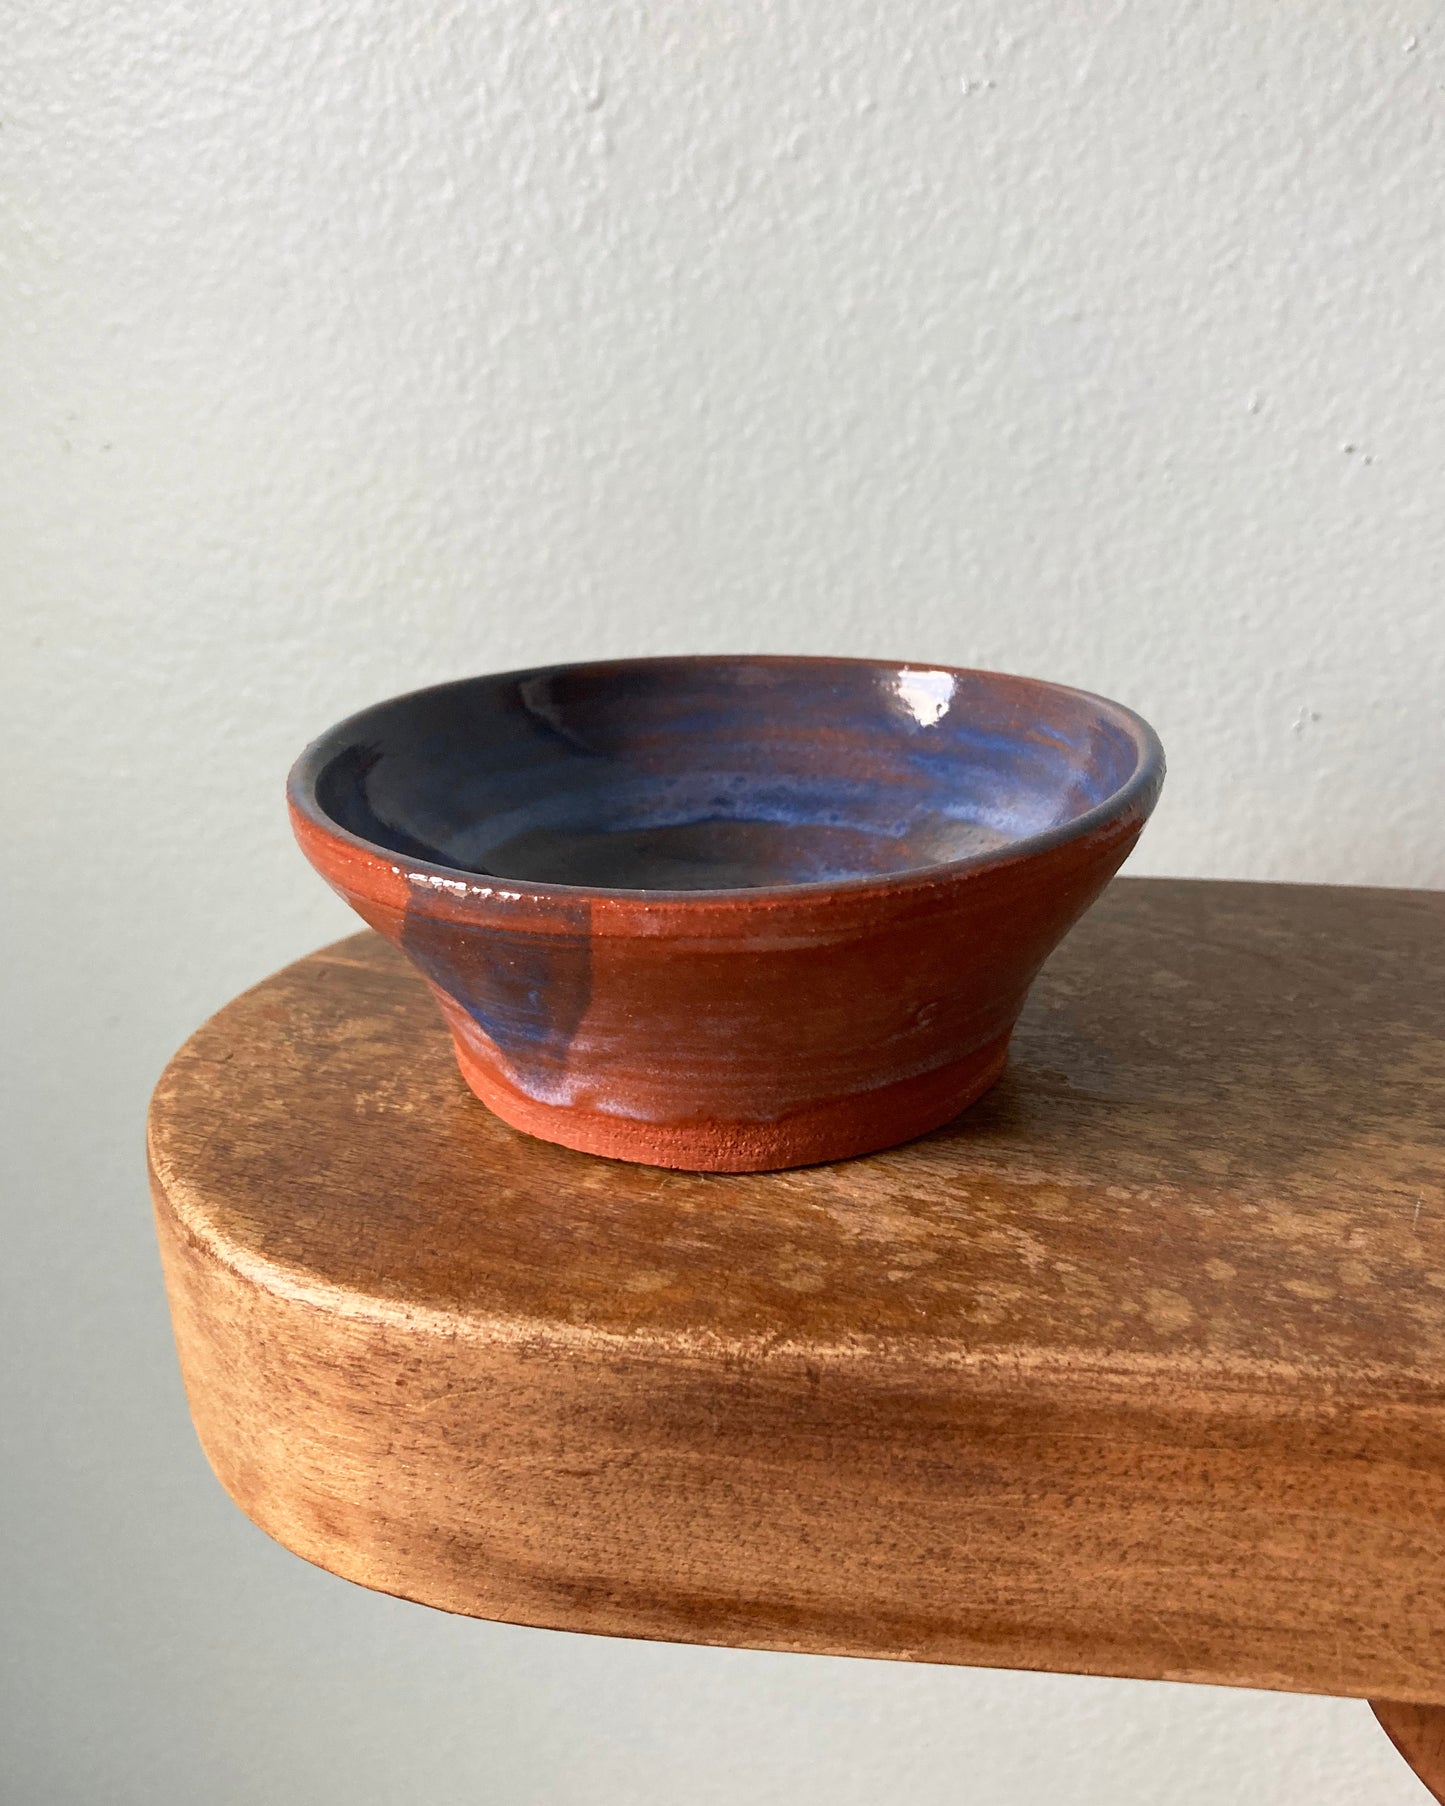 THE BLUE PERIOD BOWL